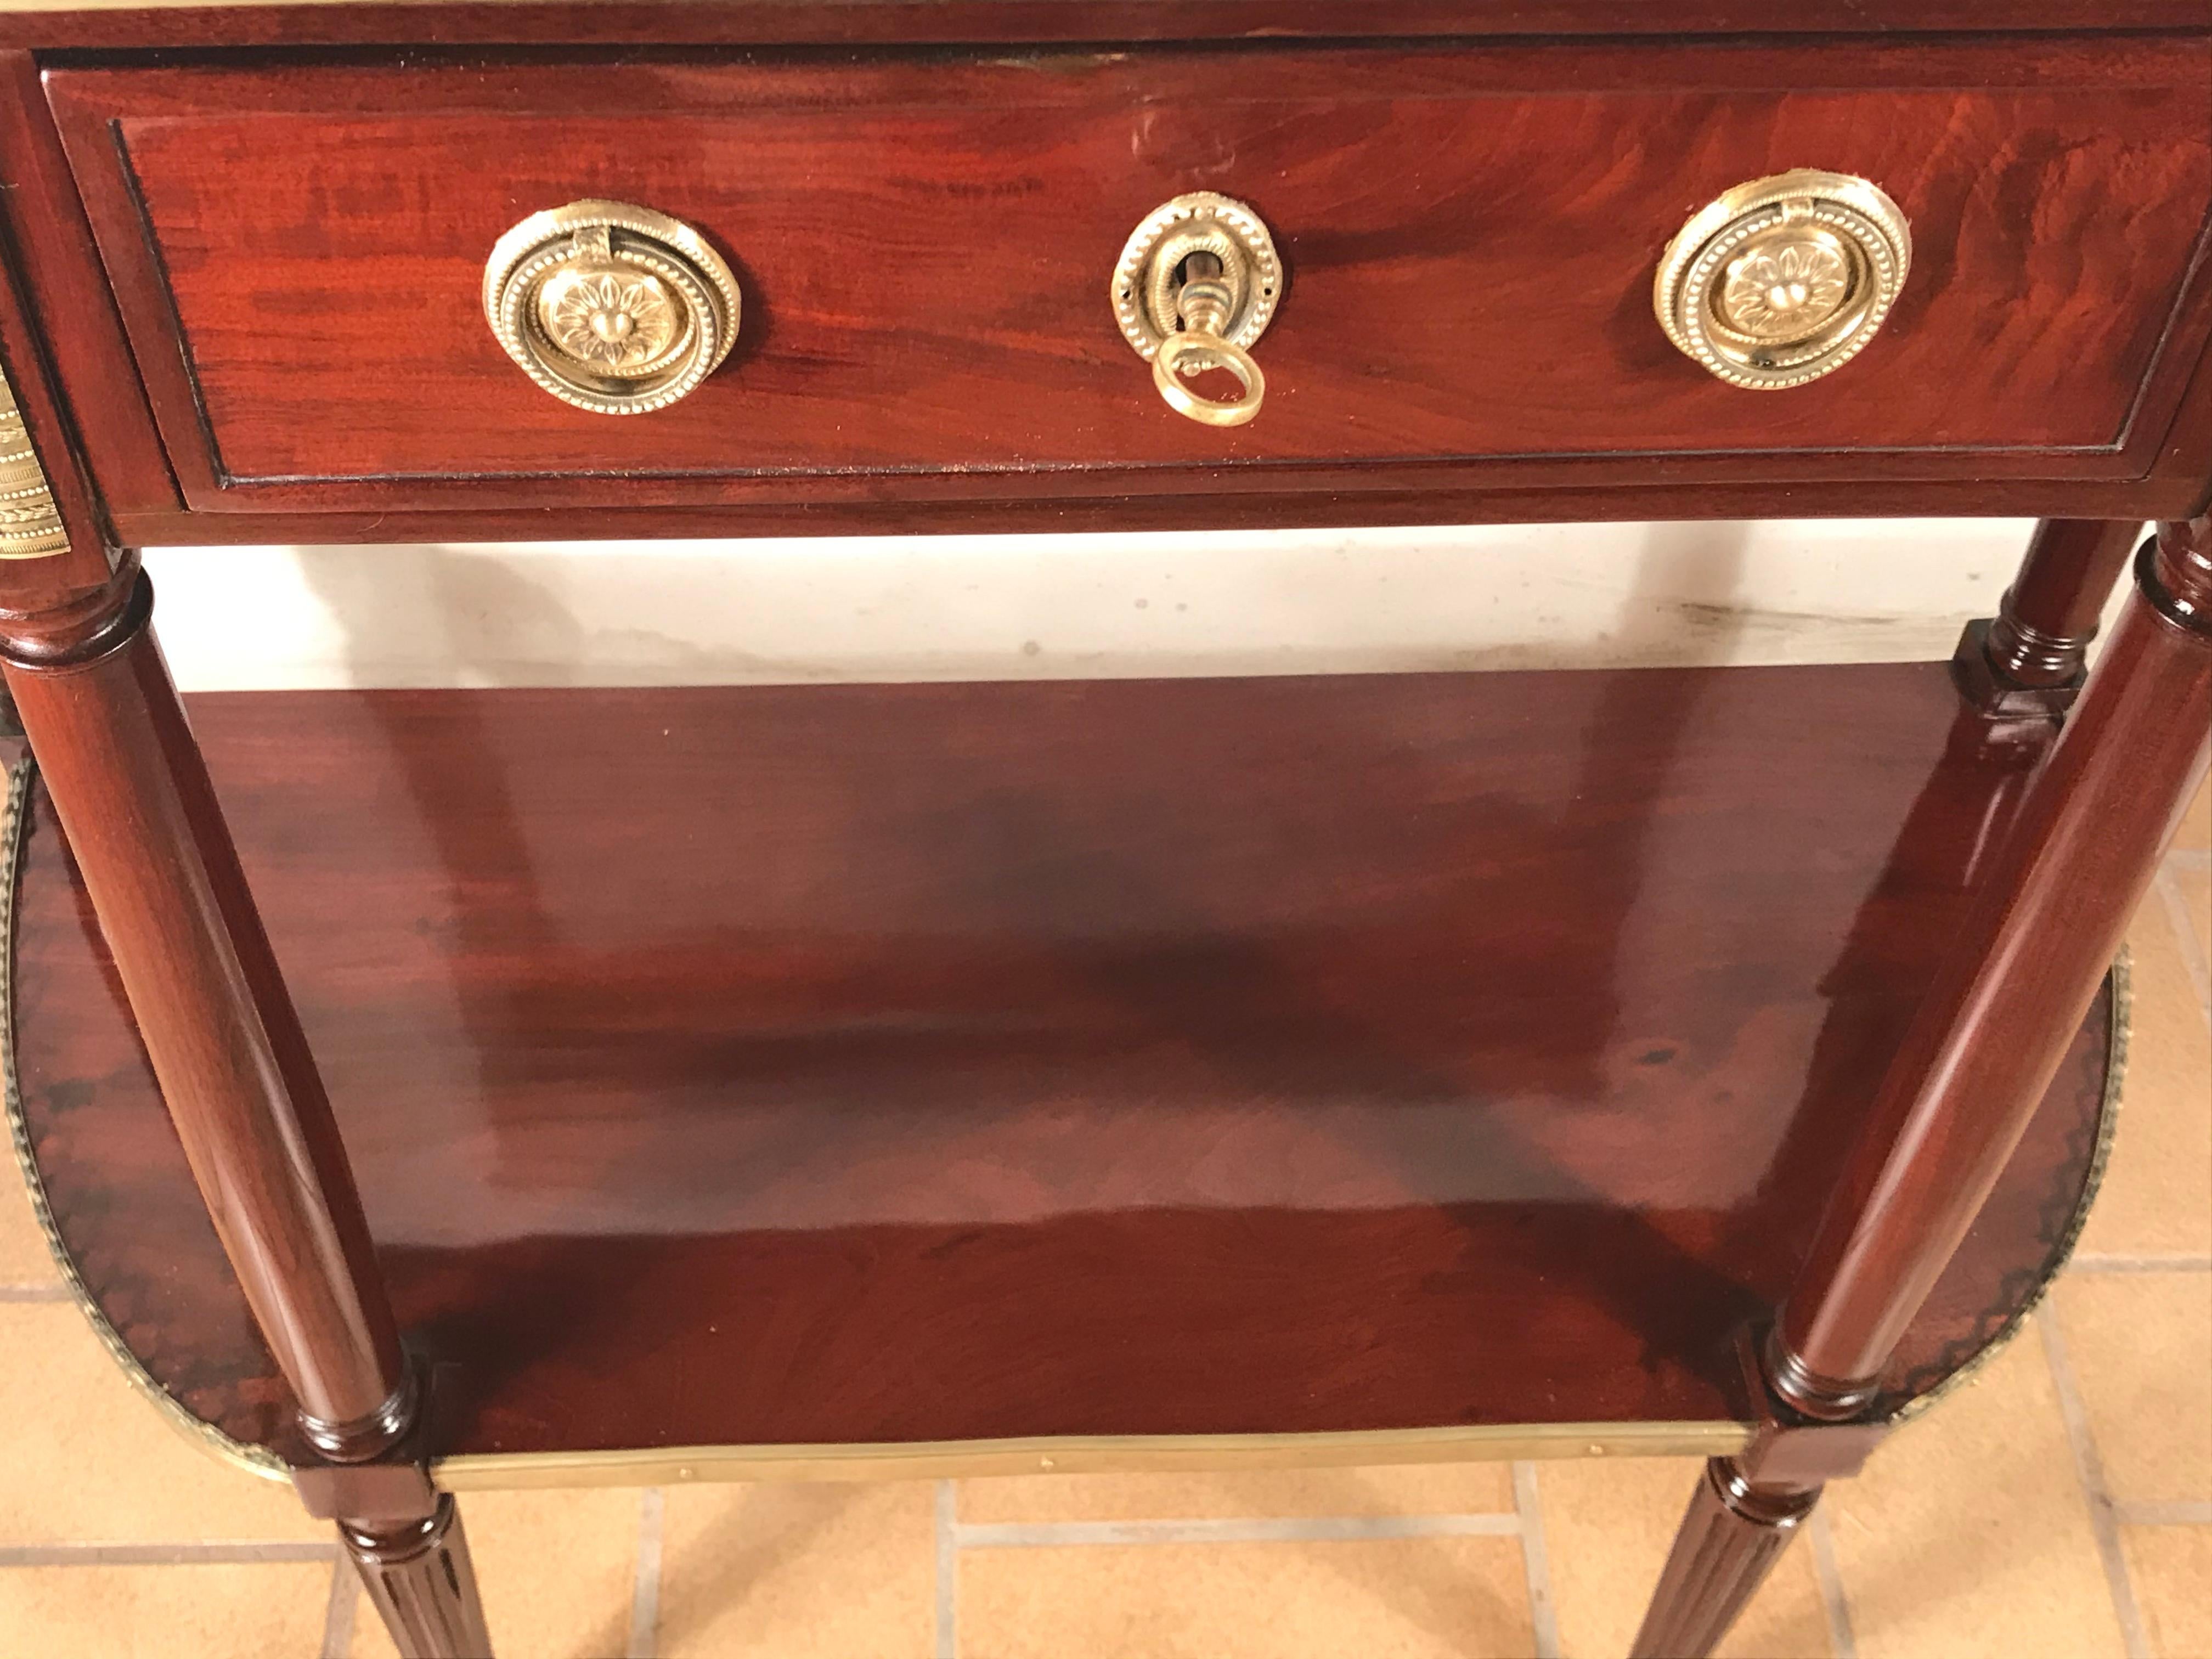 Directoire console table, France, circa 1800.
This Classic Directoire French console table has a beautiful mahogany veneer. The brass fittings are original. The marble top is framed by a pierced brass railing. The console table has one central